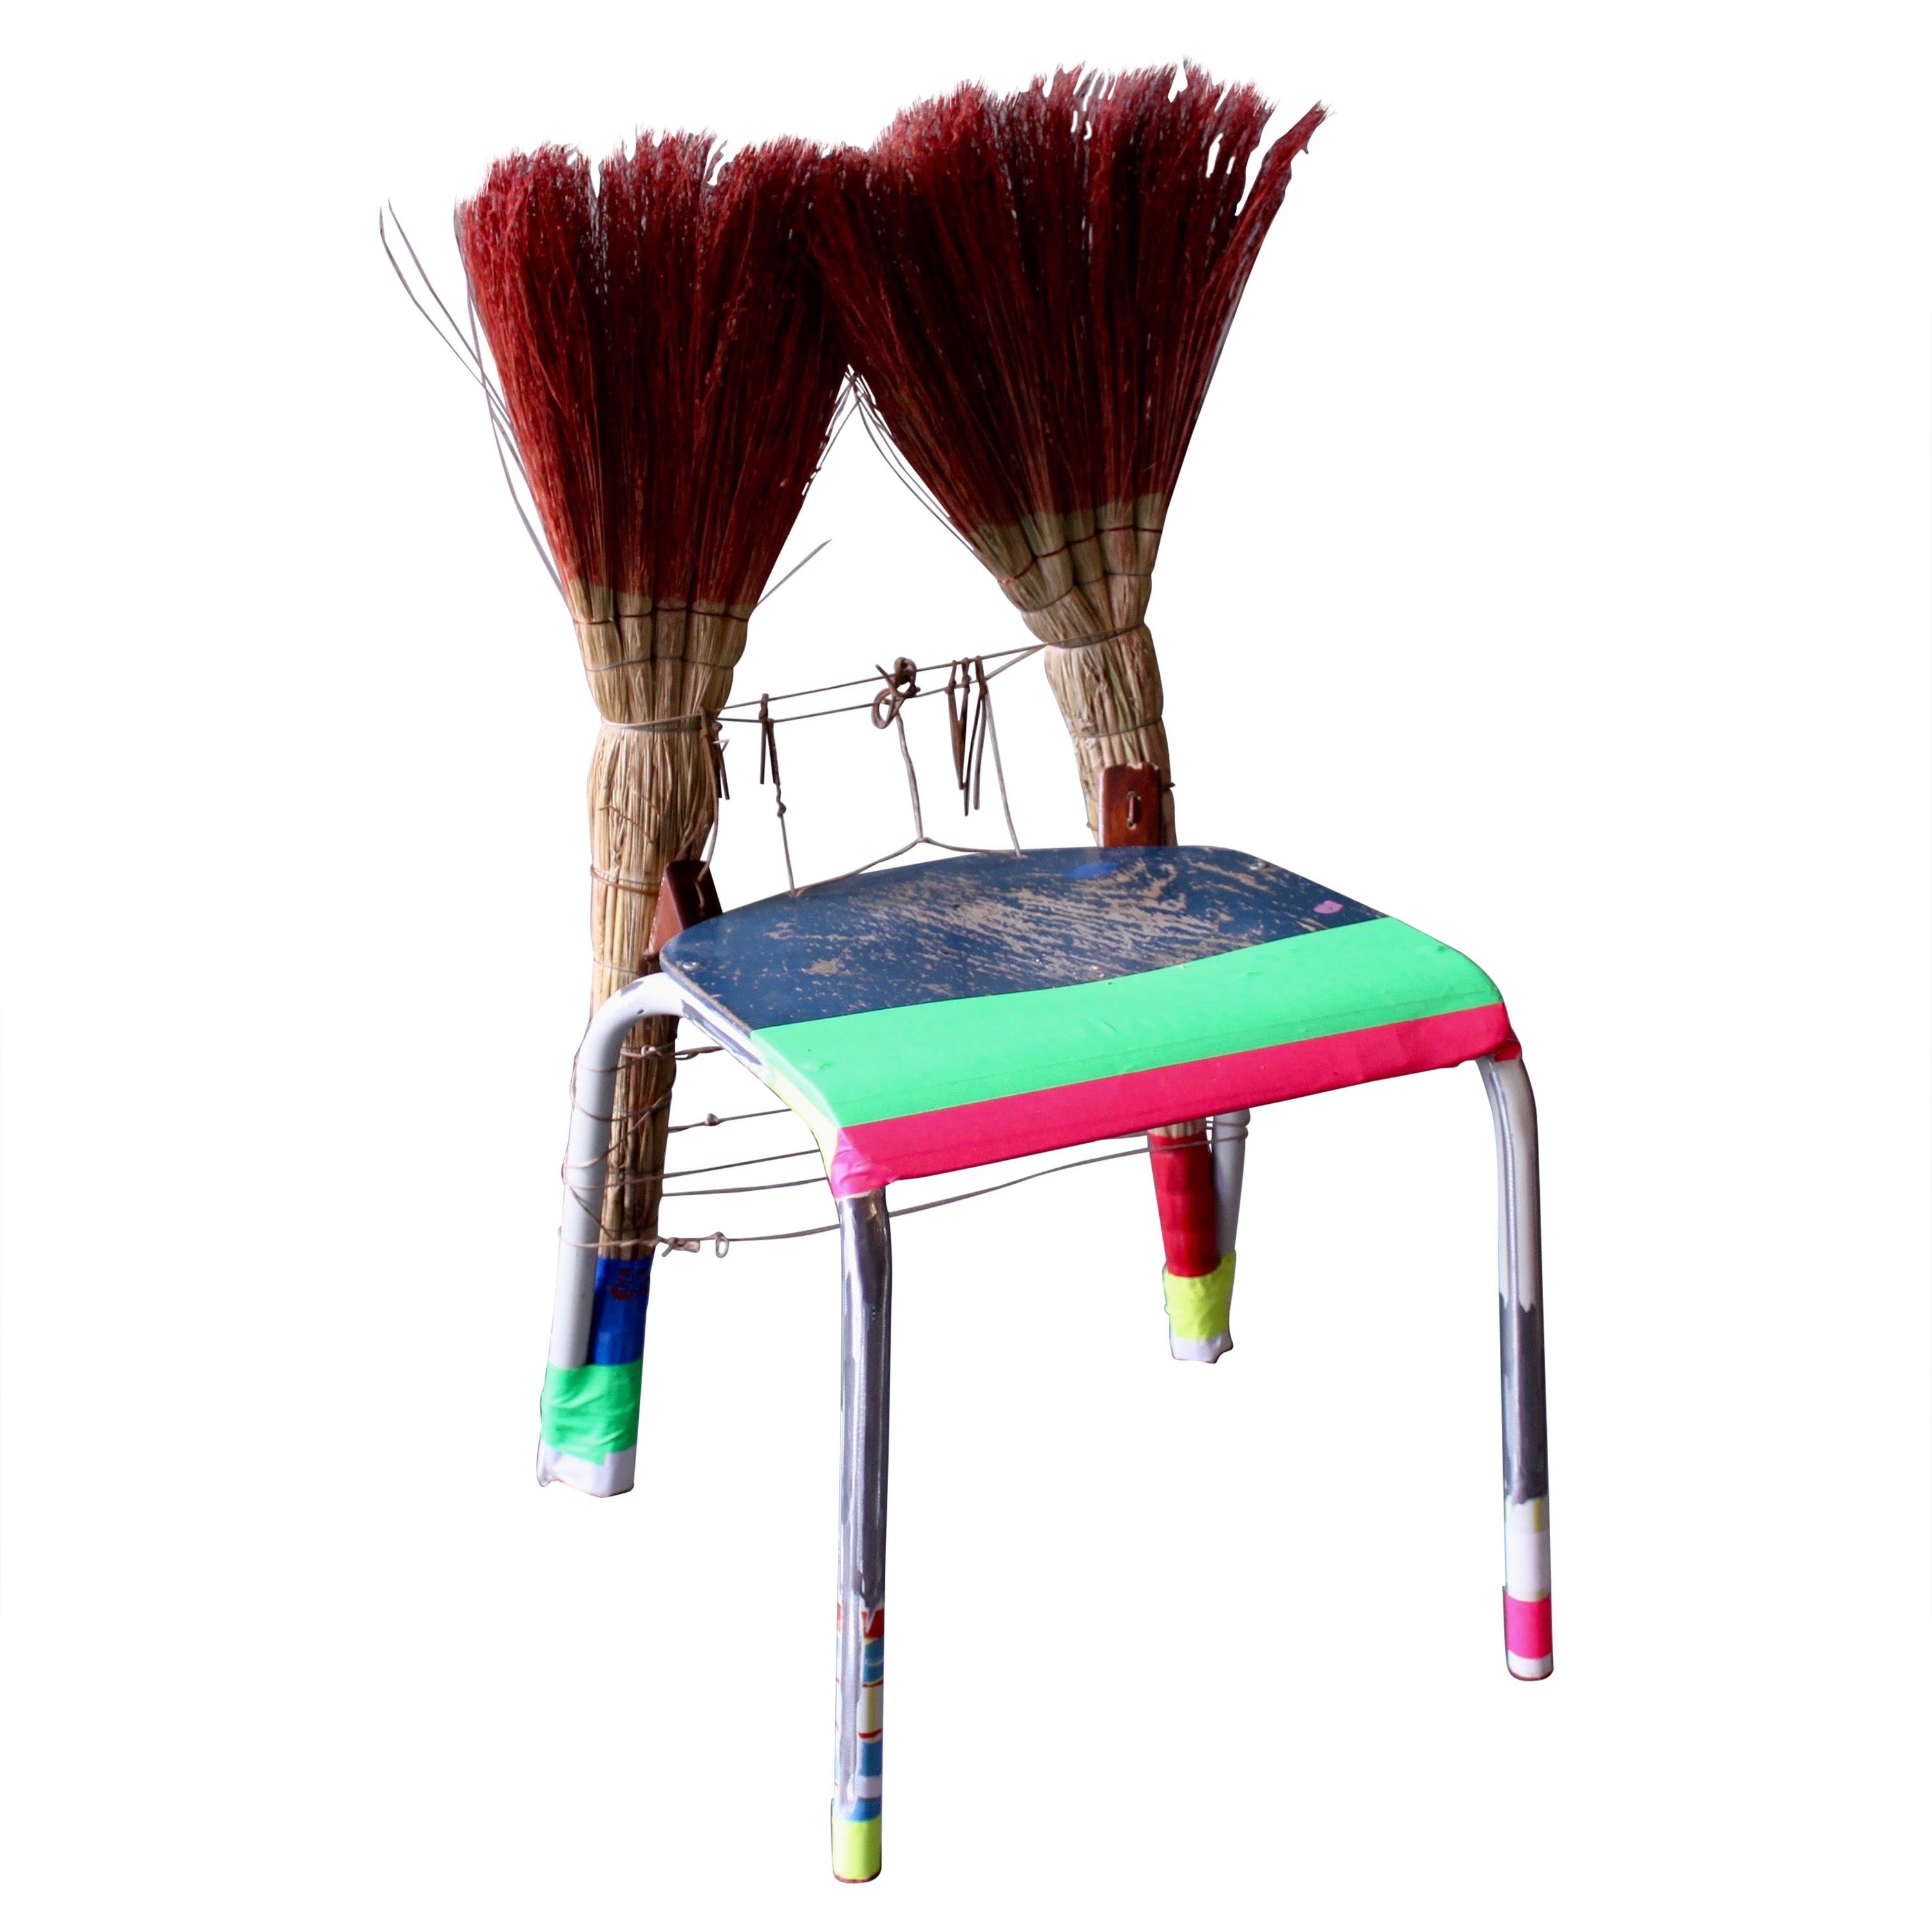 Functional Art Chair "Dust my Broom" by Markus Friedrich Staab For Sale